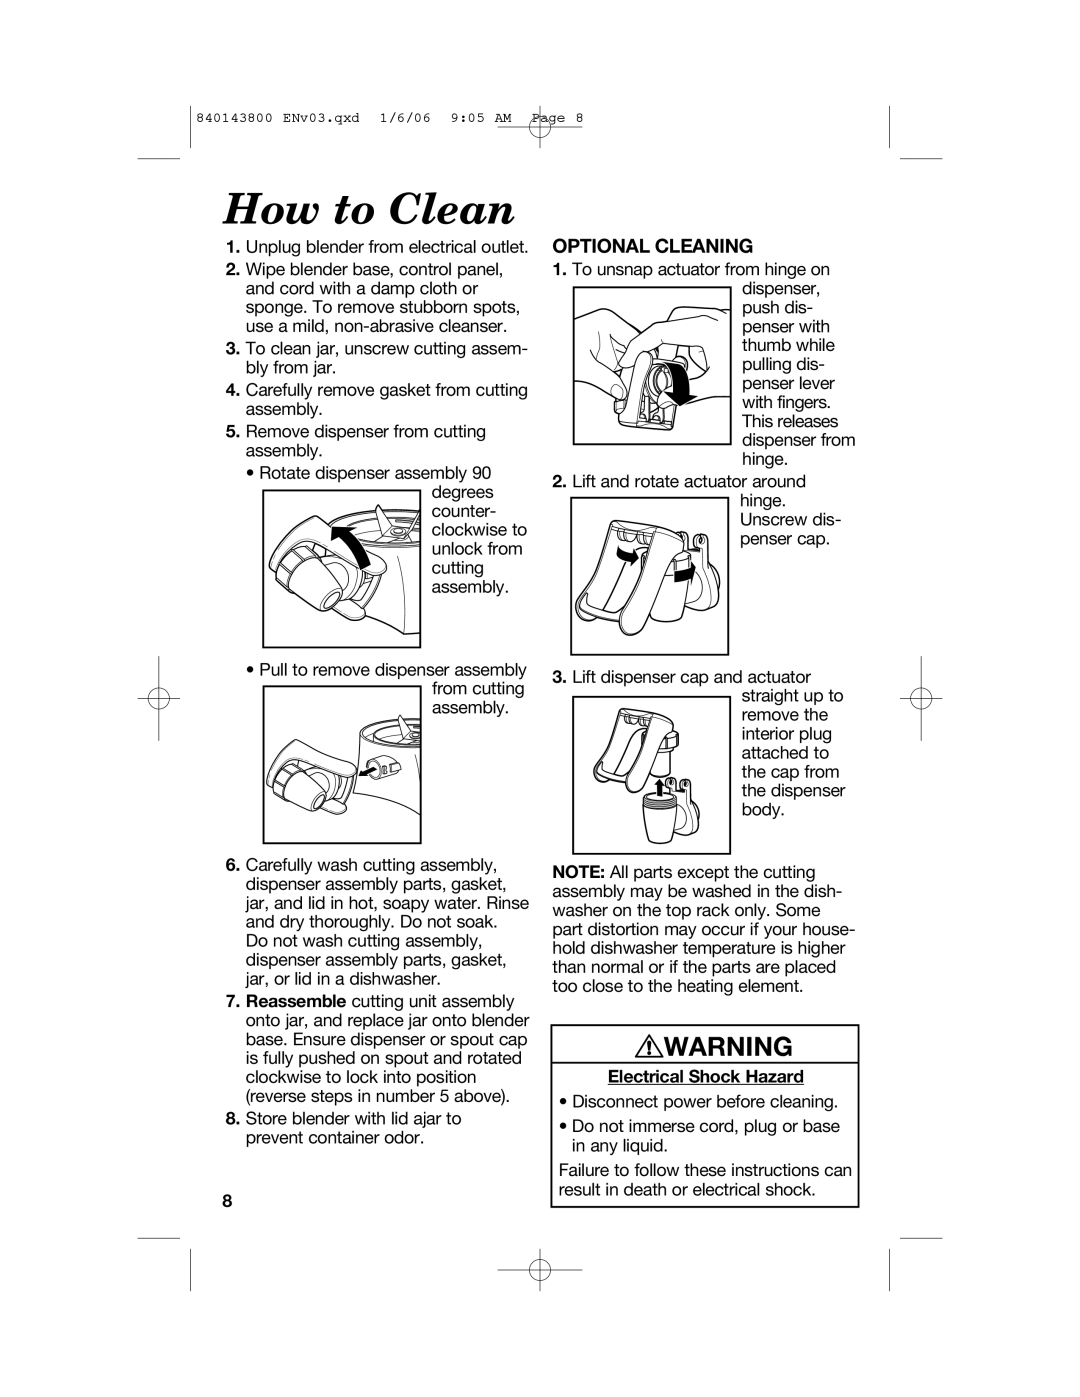 Hamilton Beach 840143800 manual How to Clean, Optional Cleaning, Electrical Shock Hazard 